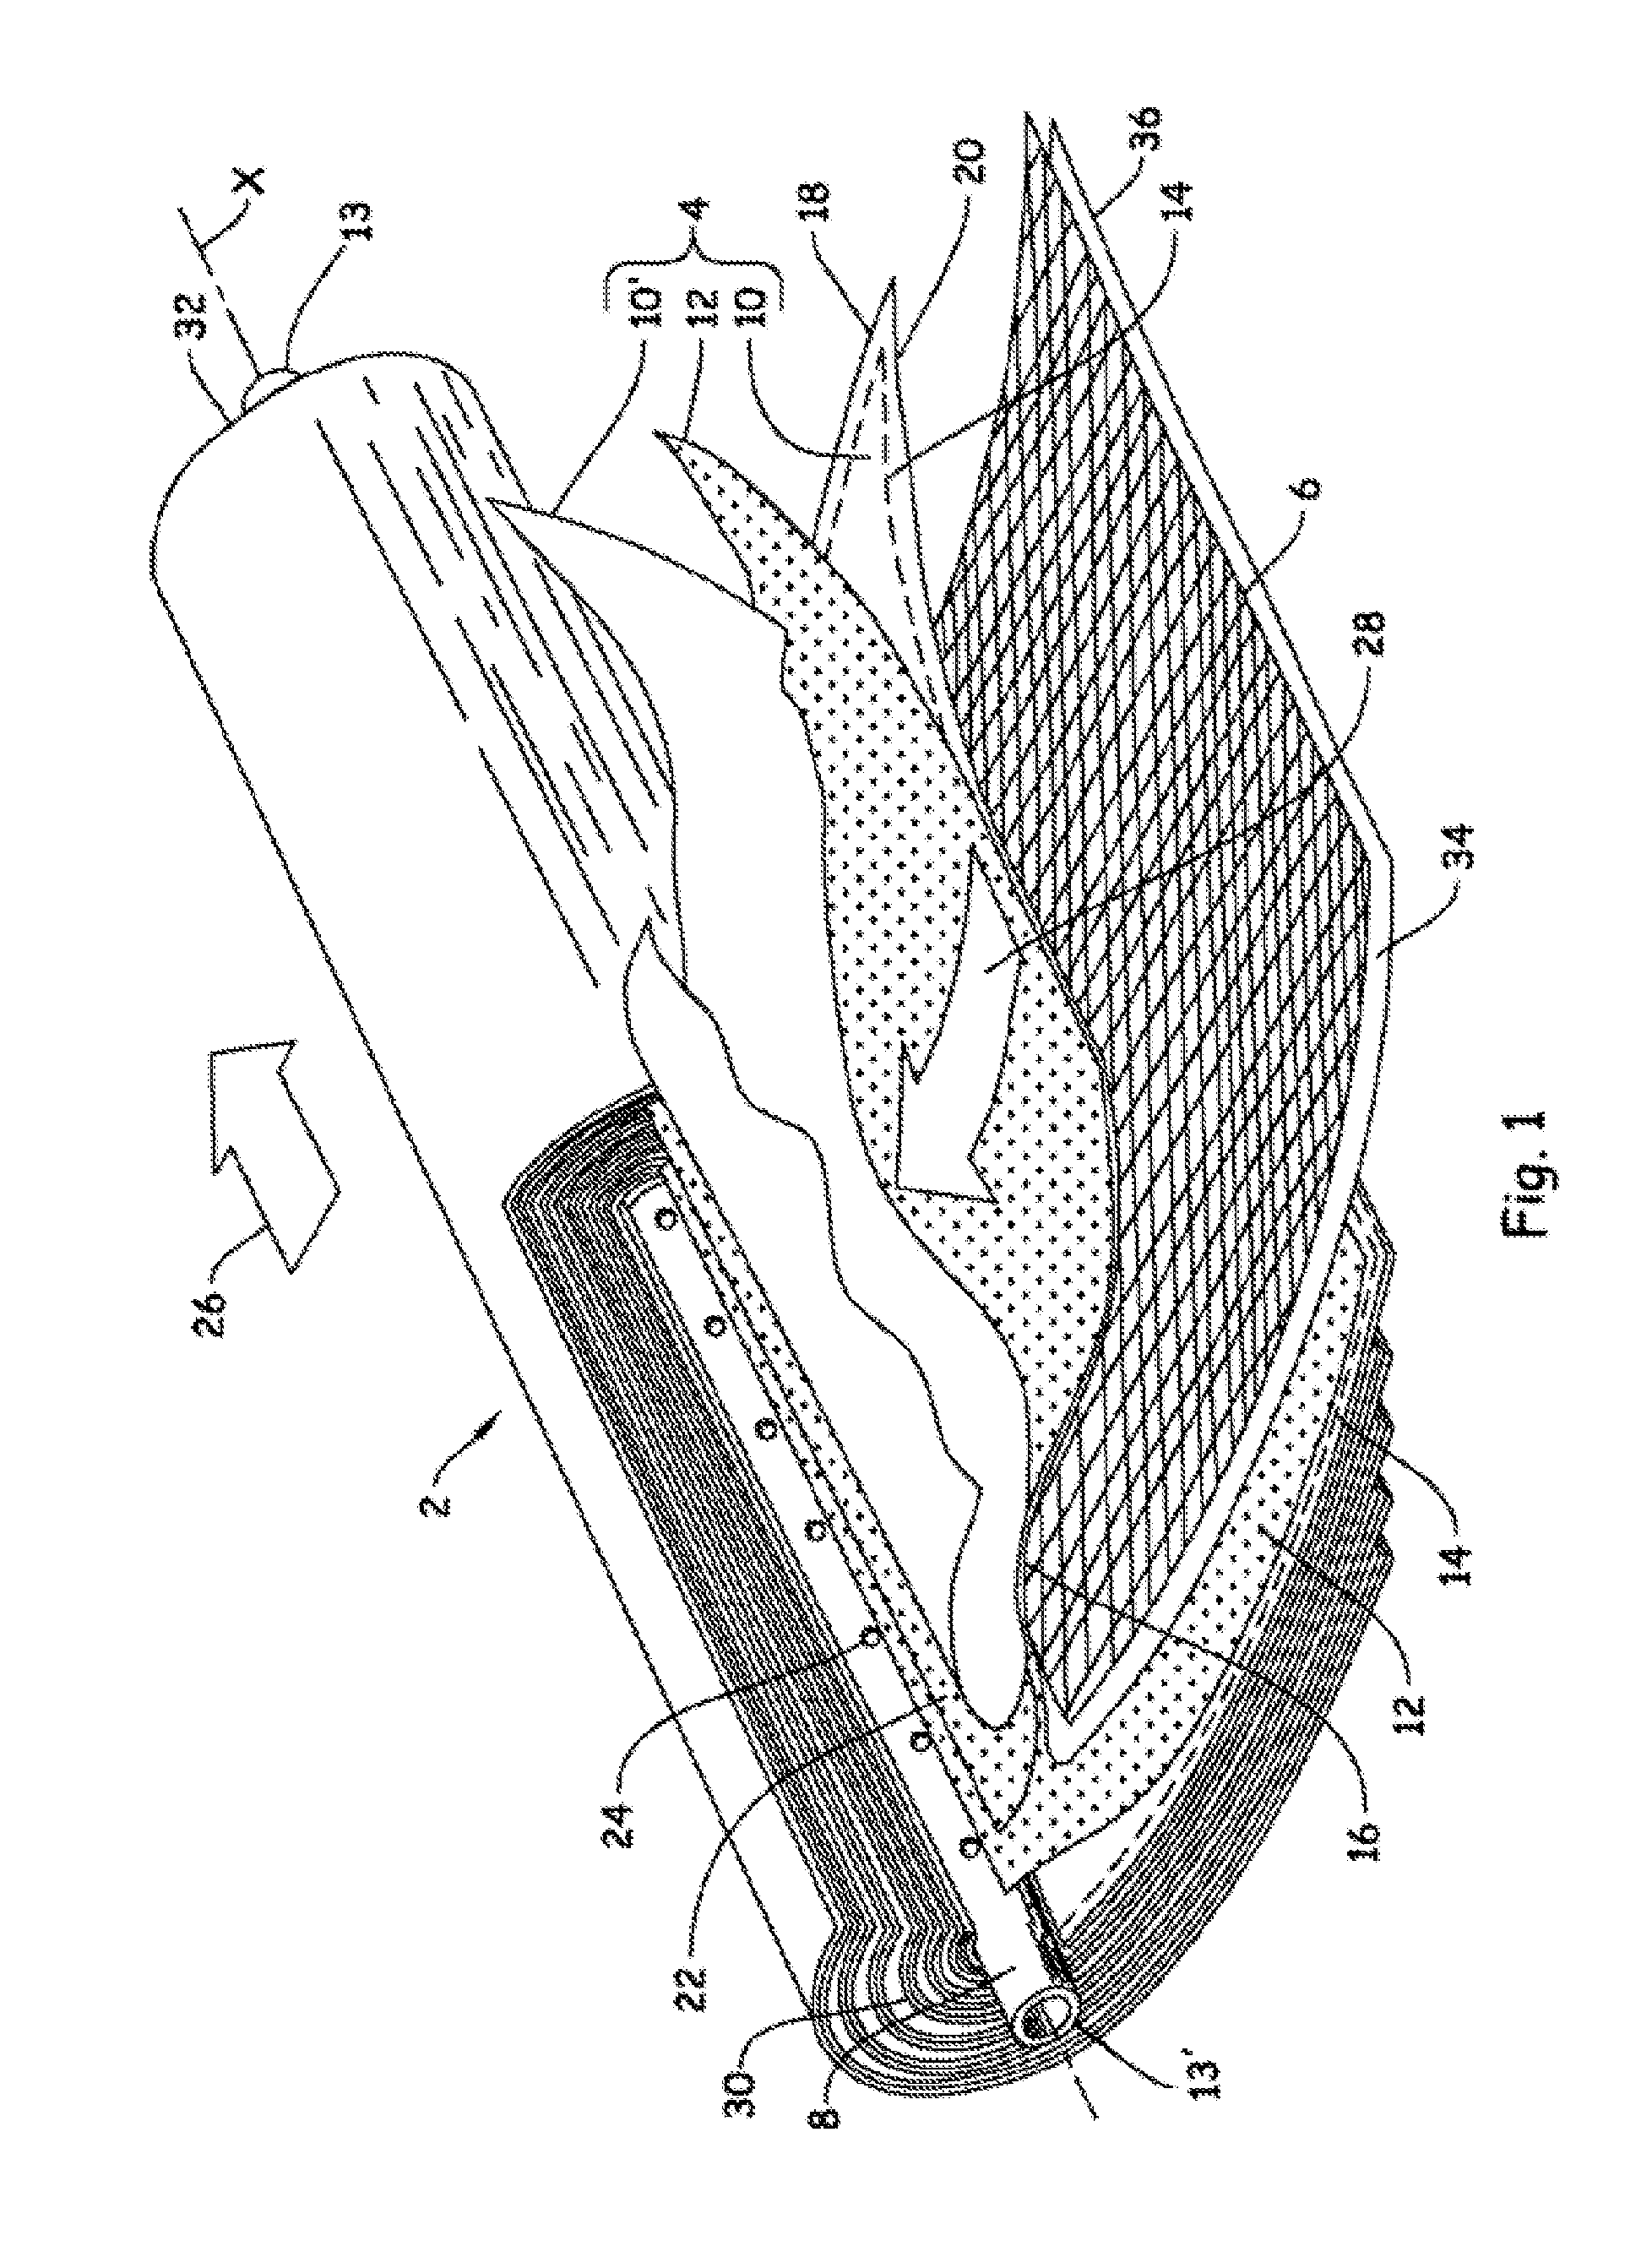 Spiral wound module with integrated permeate flow controller